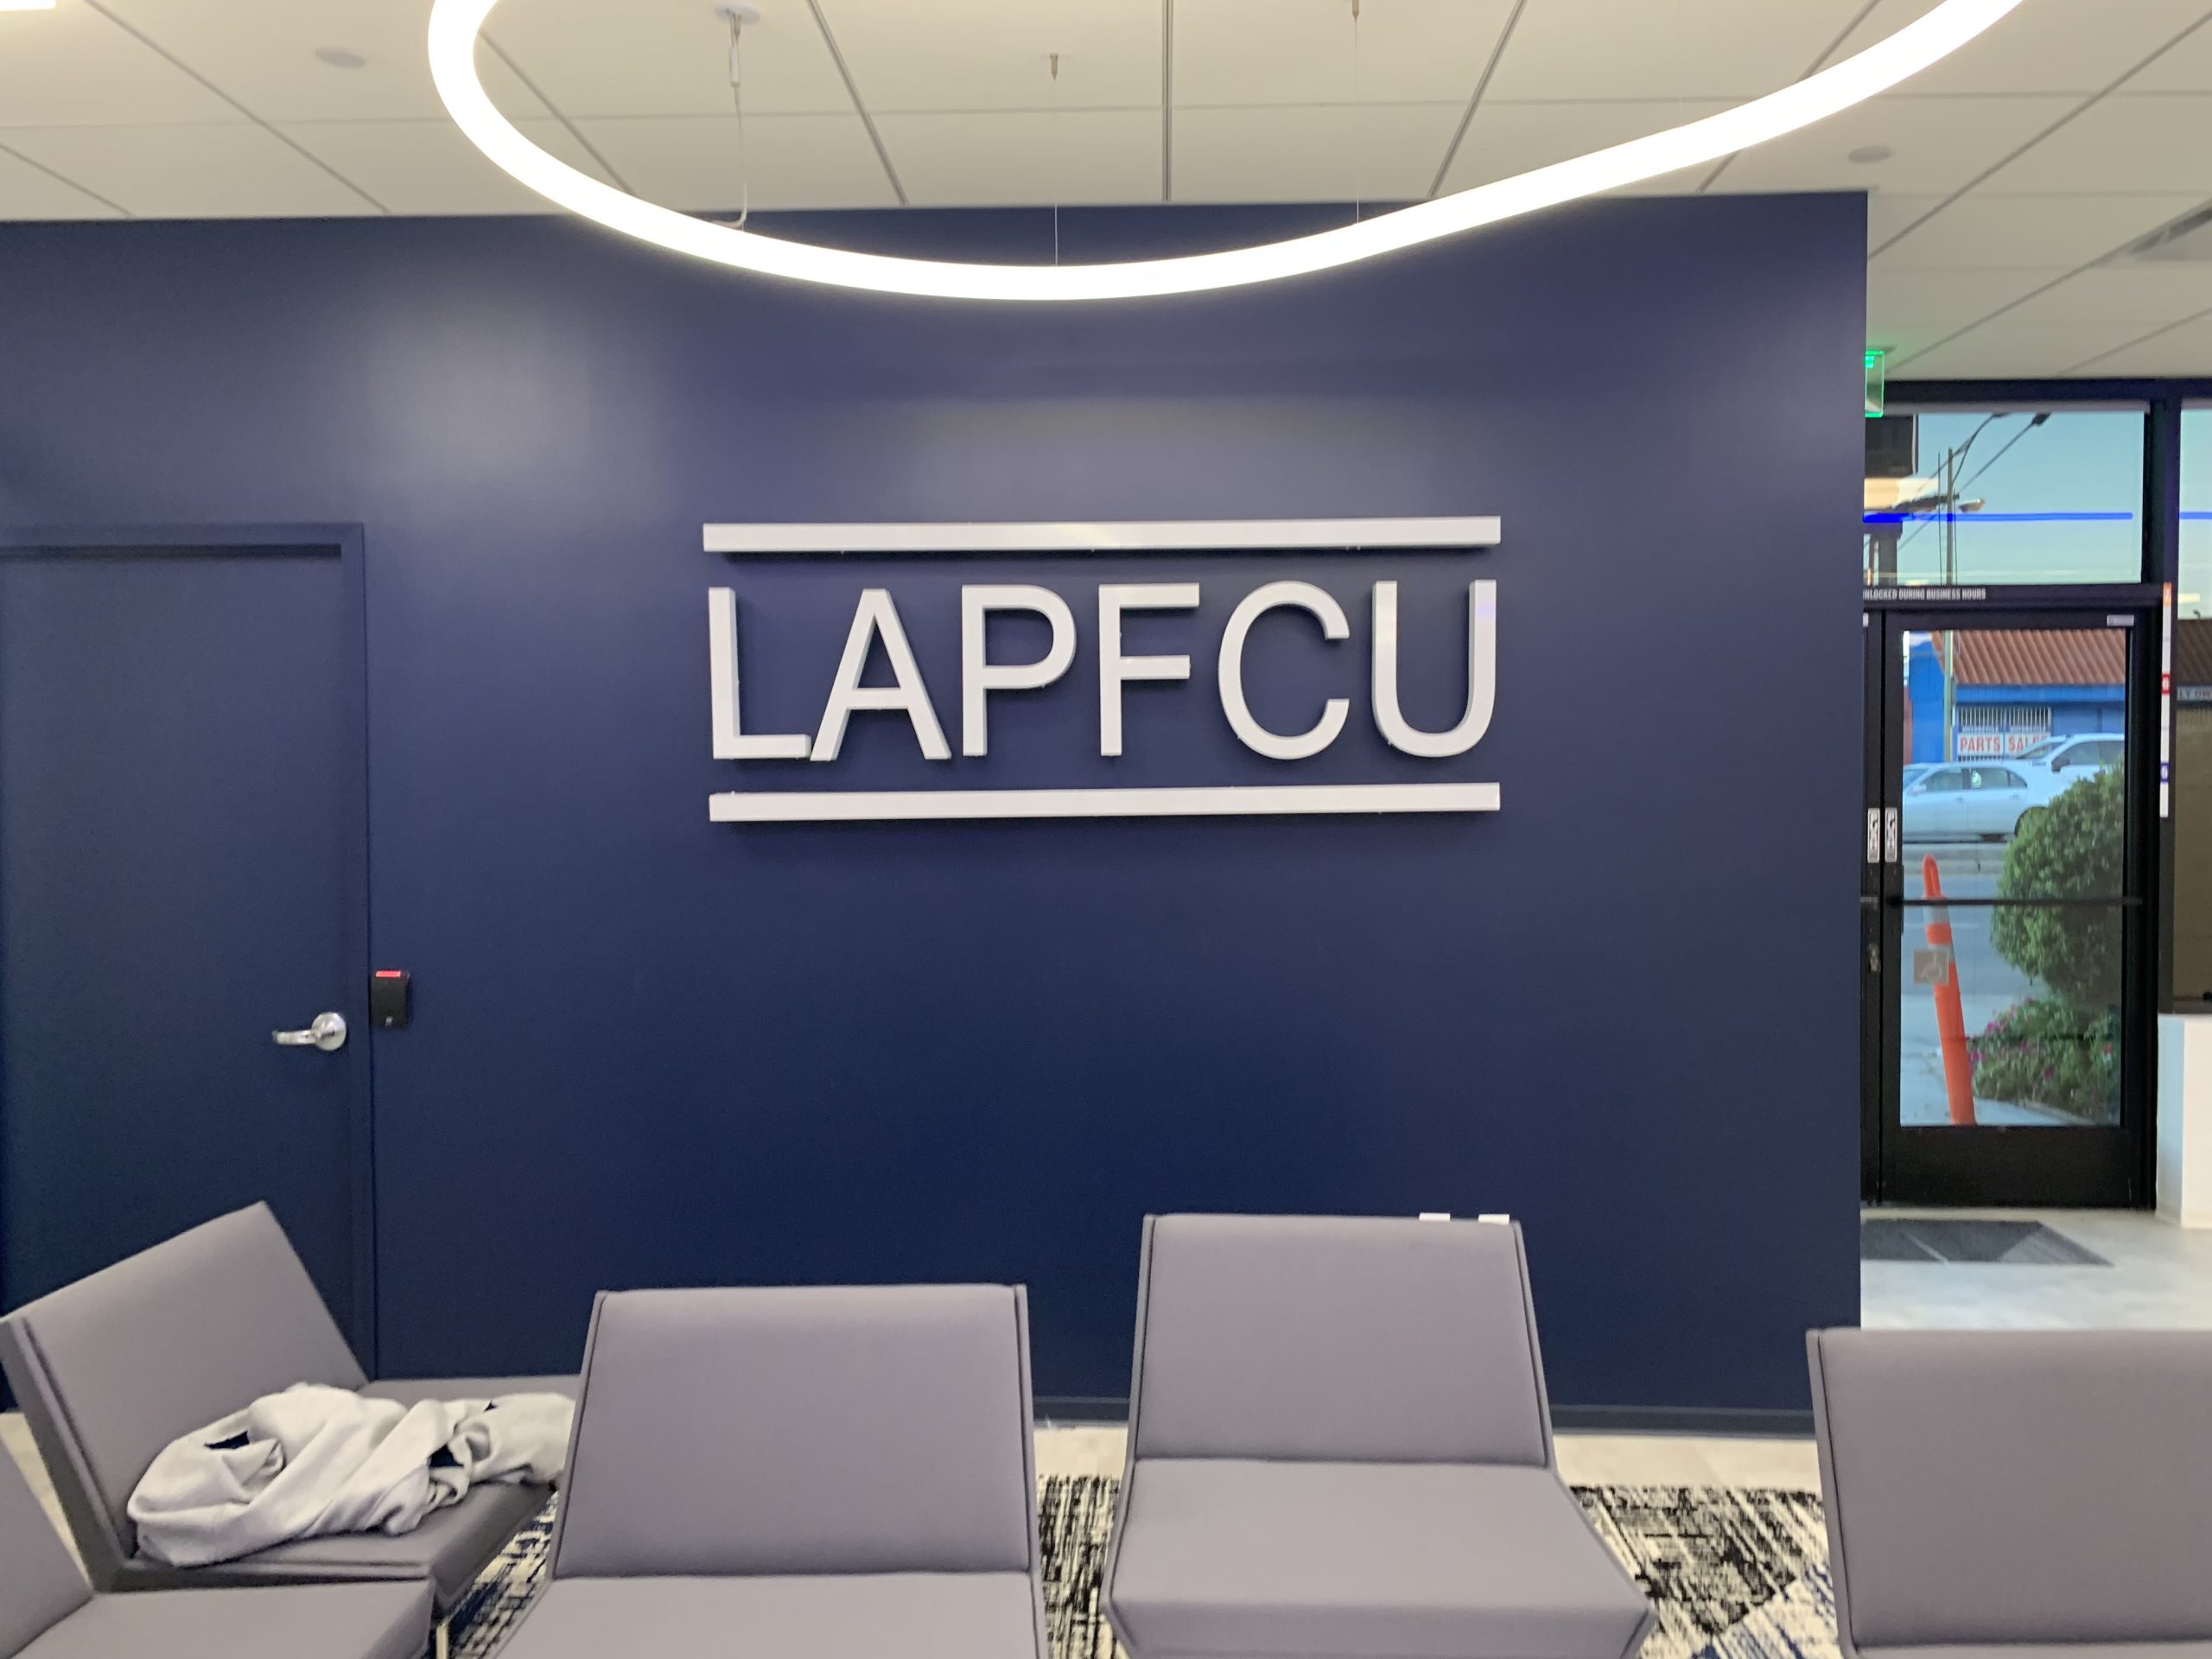 This is the eye-catching backlit lobby sign for LAPFCU's reception area. With these channel letters, their Van Nuys office will be visually impressive.